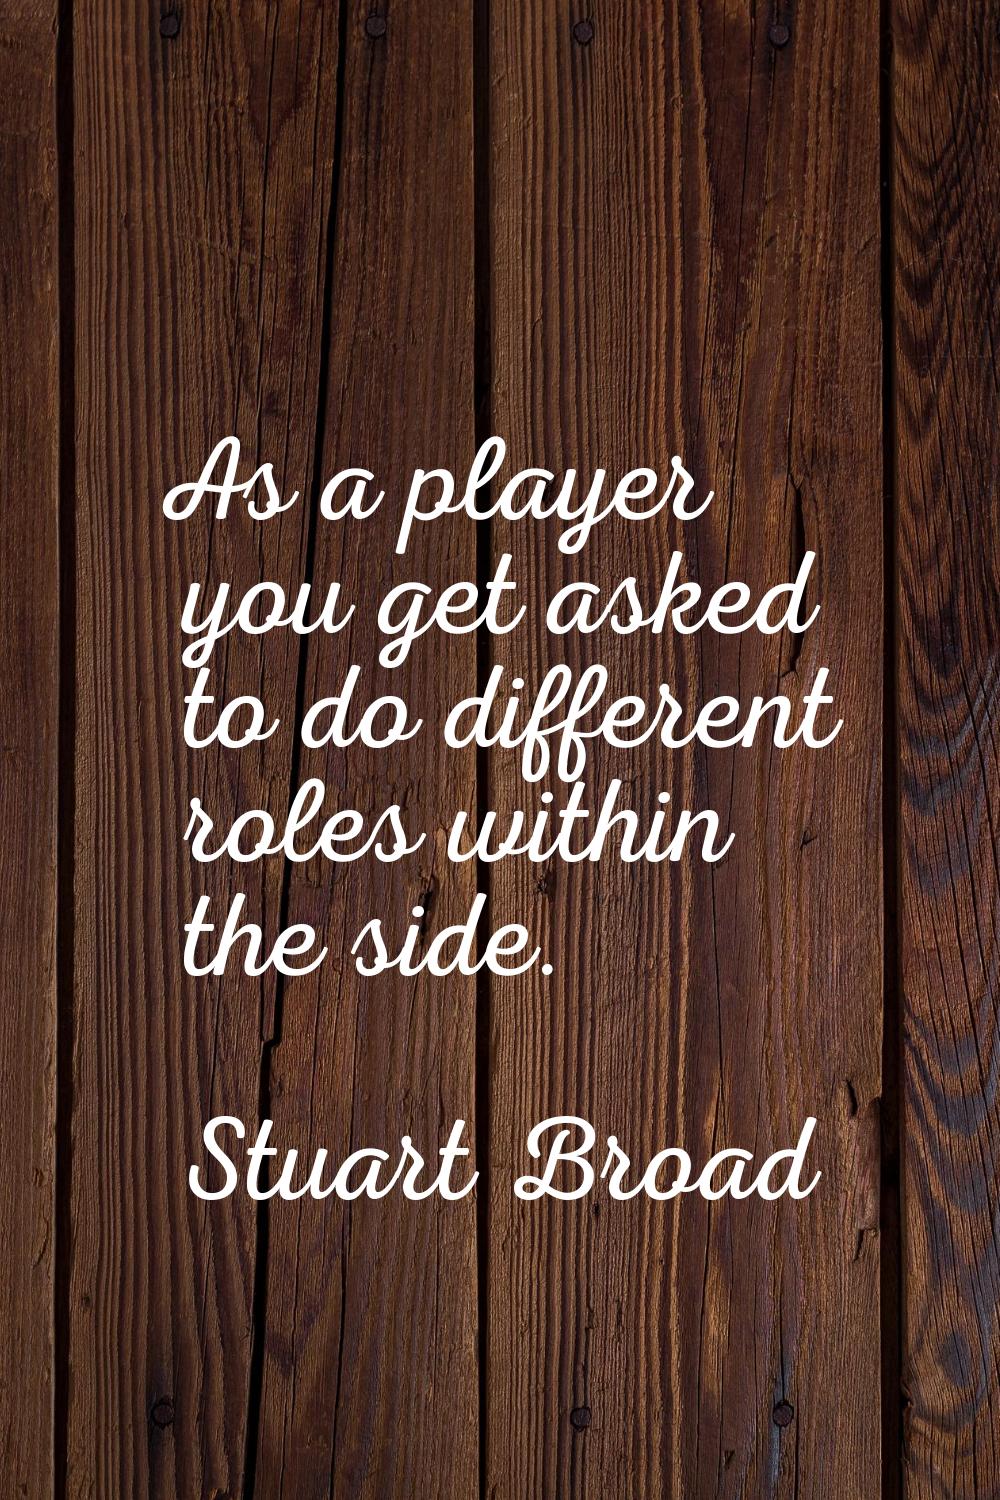 As a player you get asked to do different roles within the side.